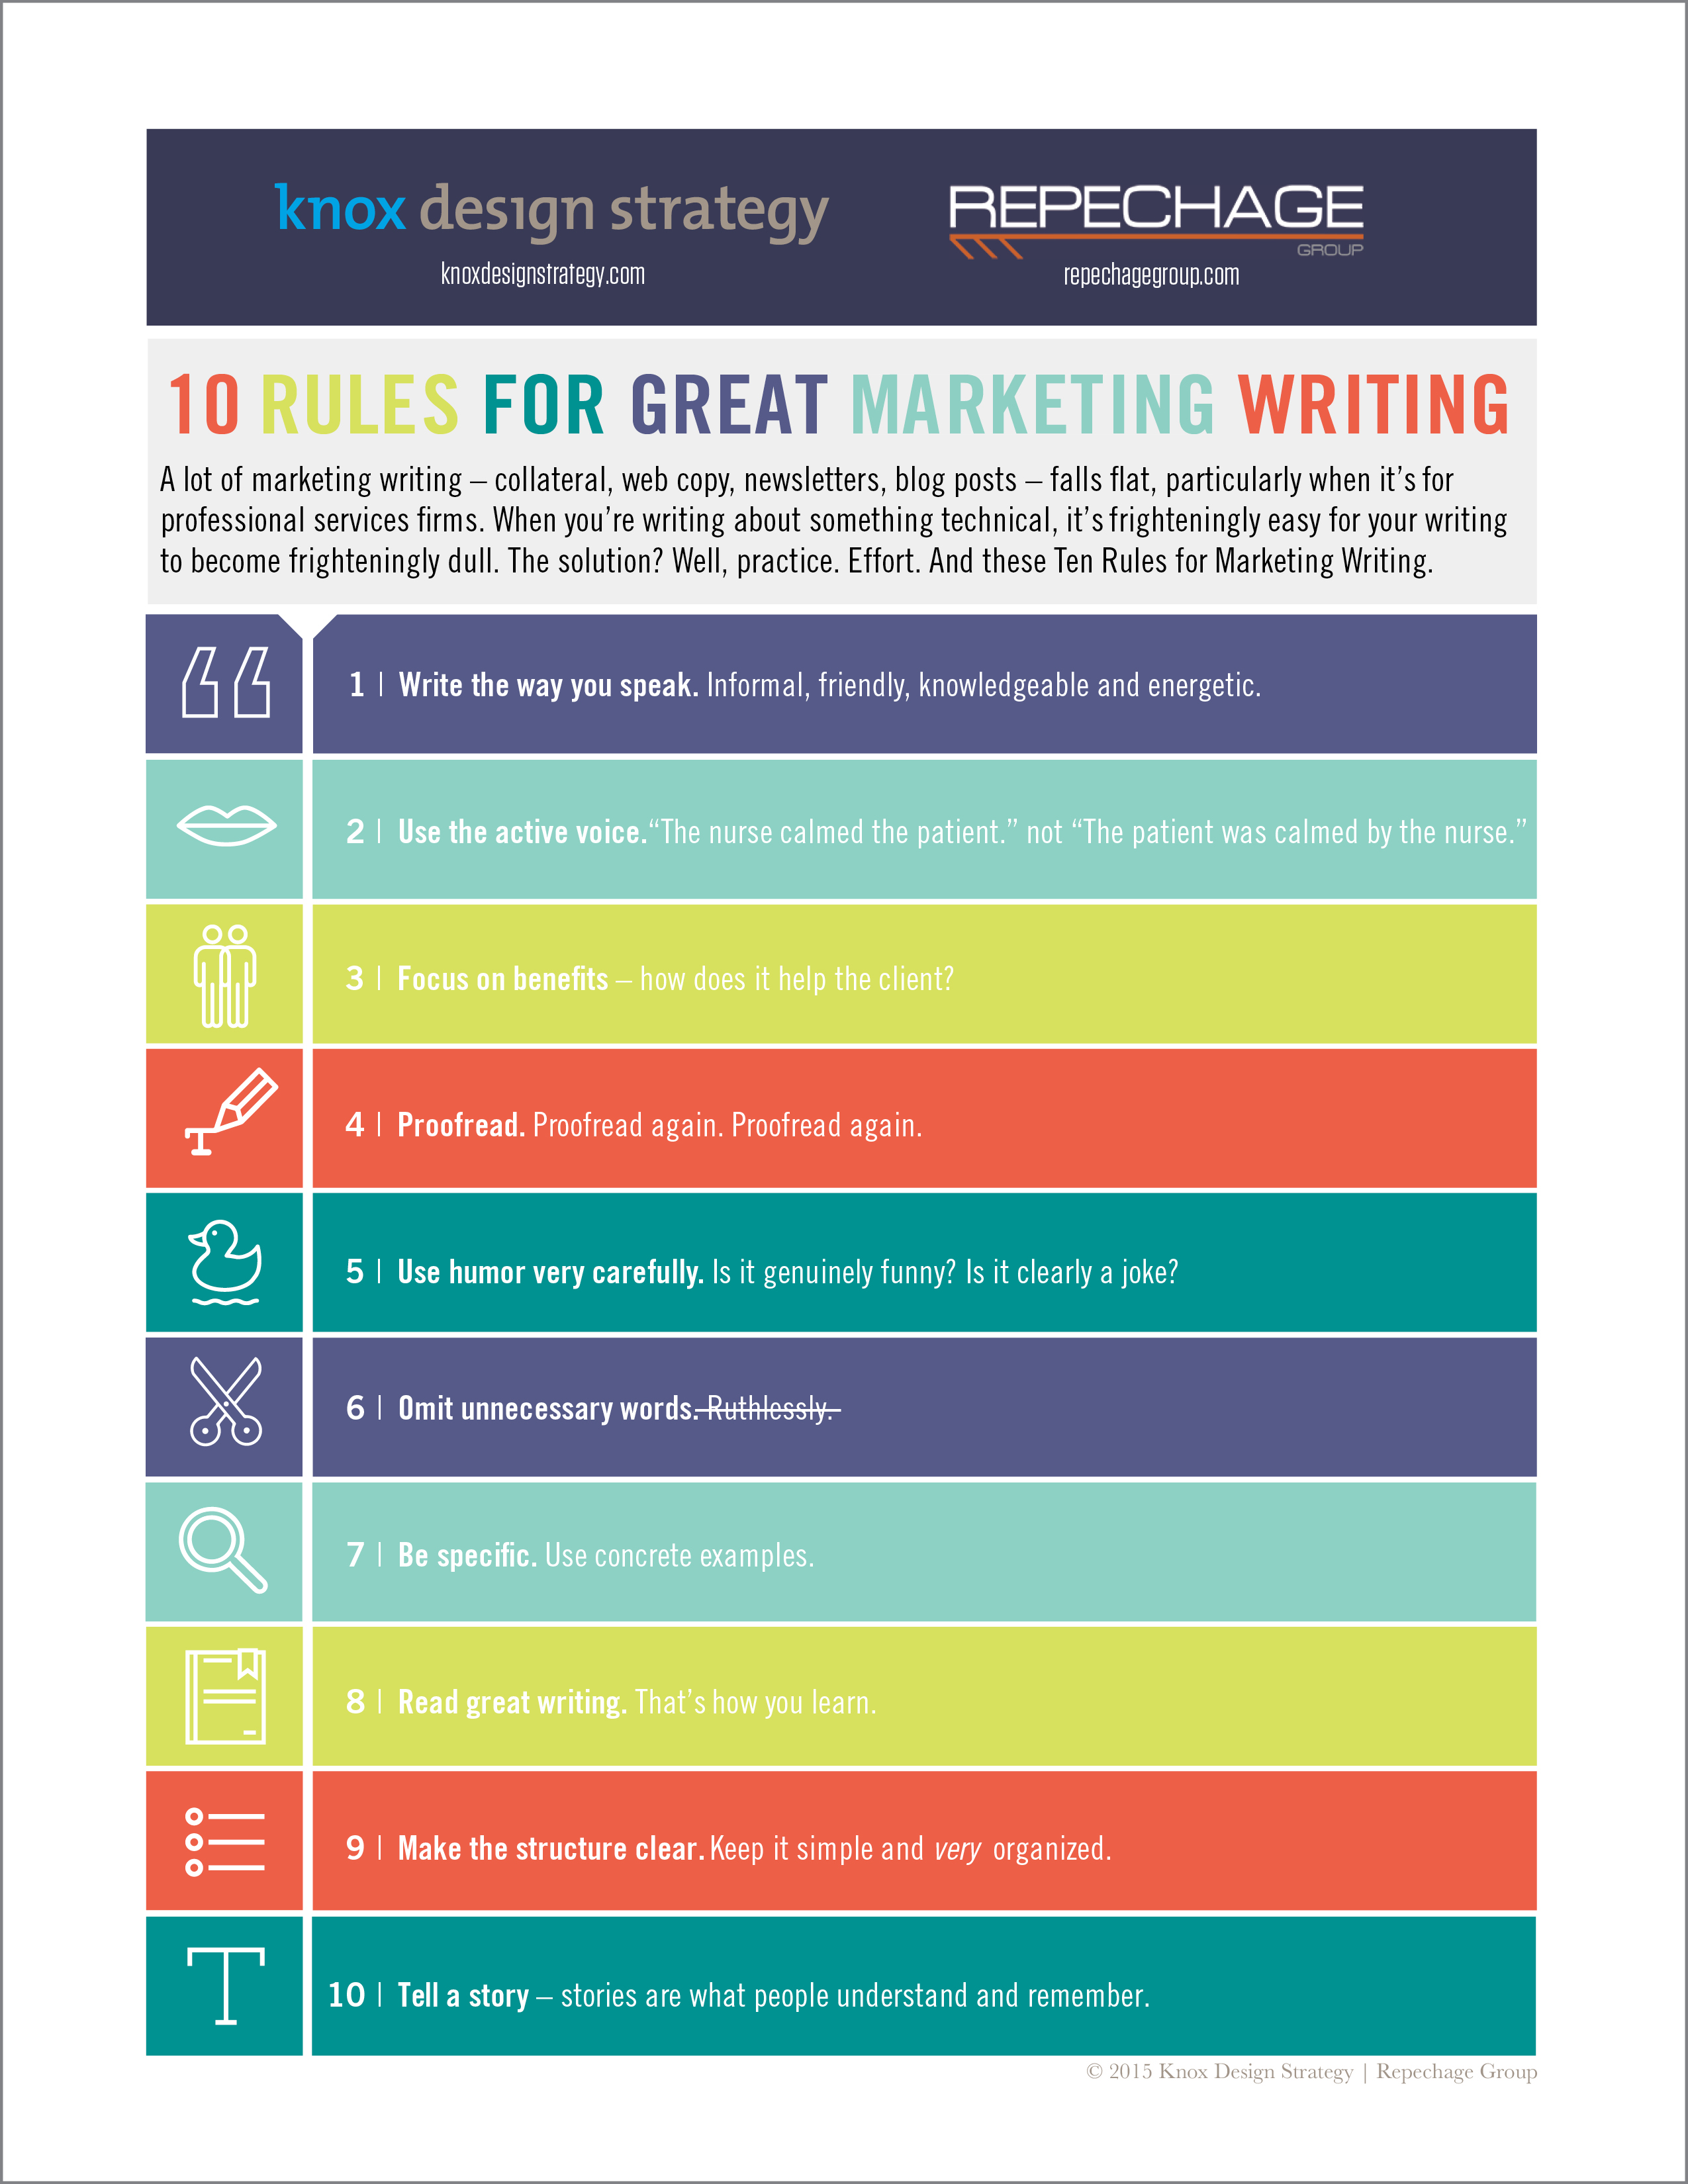 10-Rules-for-Writing-Knox-Design-Strategy1